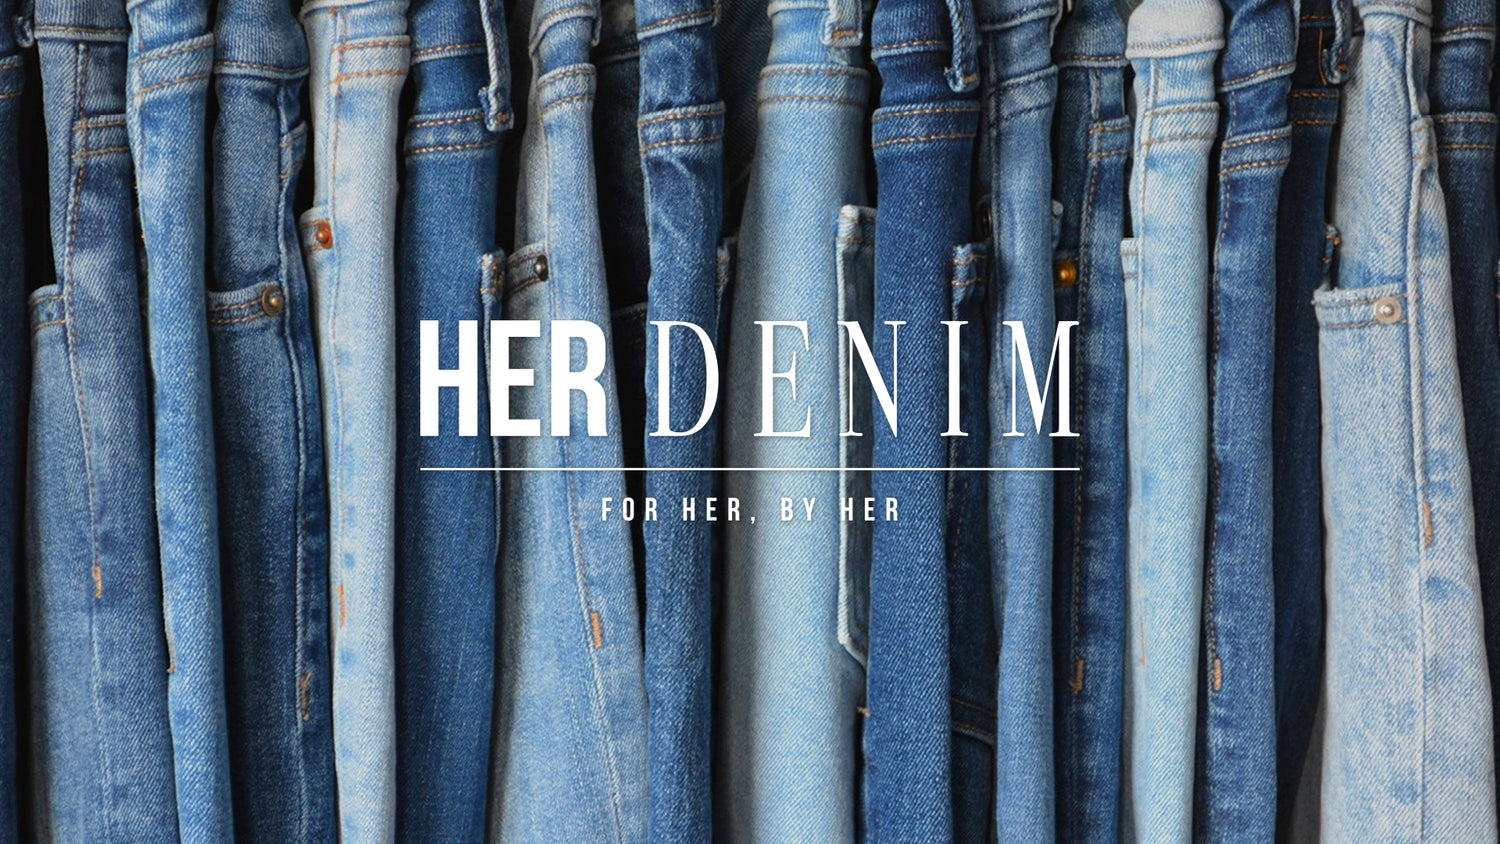 HER Denim, ethically sourced. Premium Fashion with Purpose